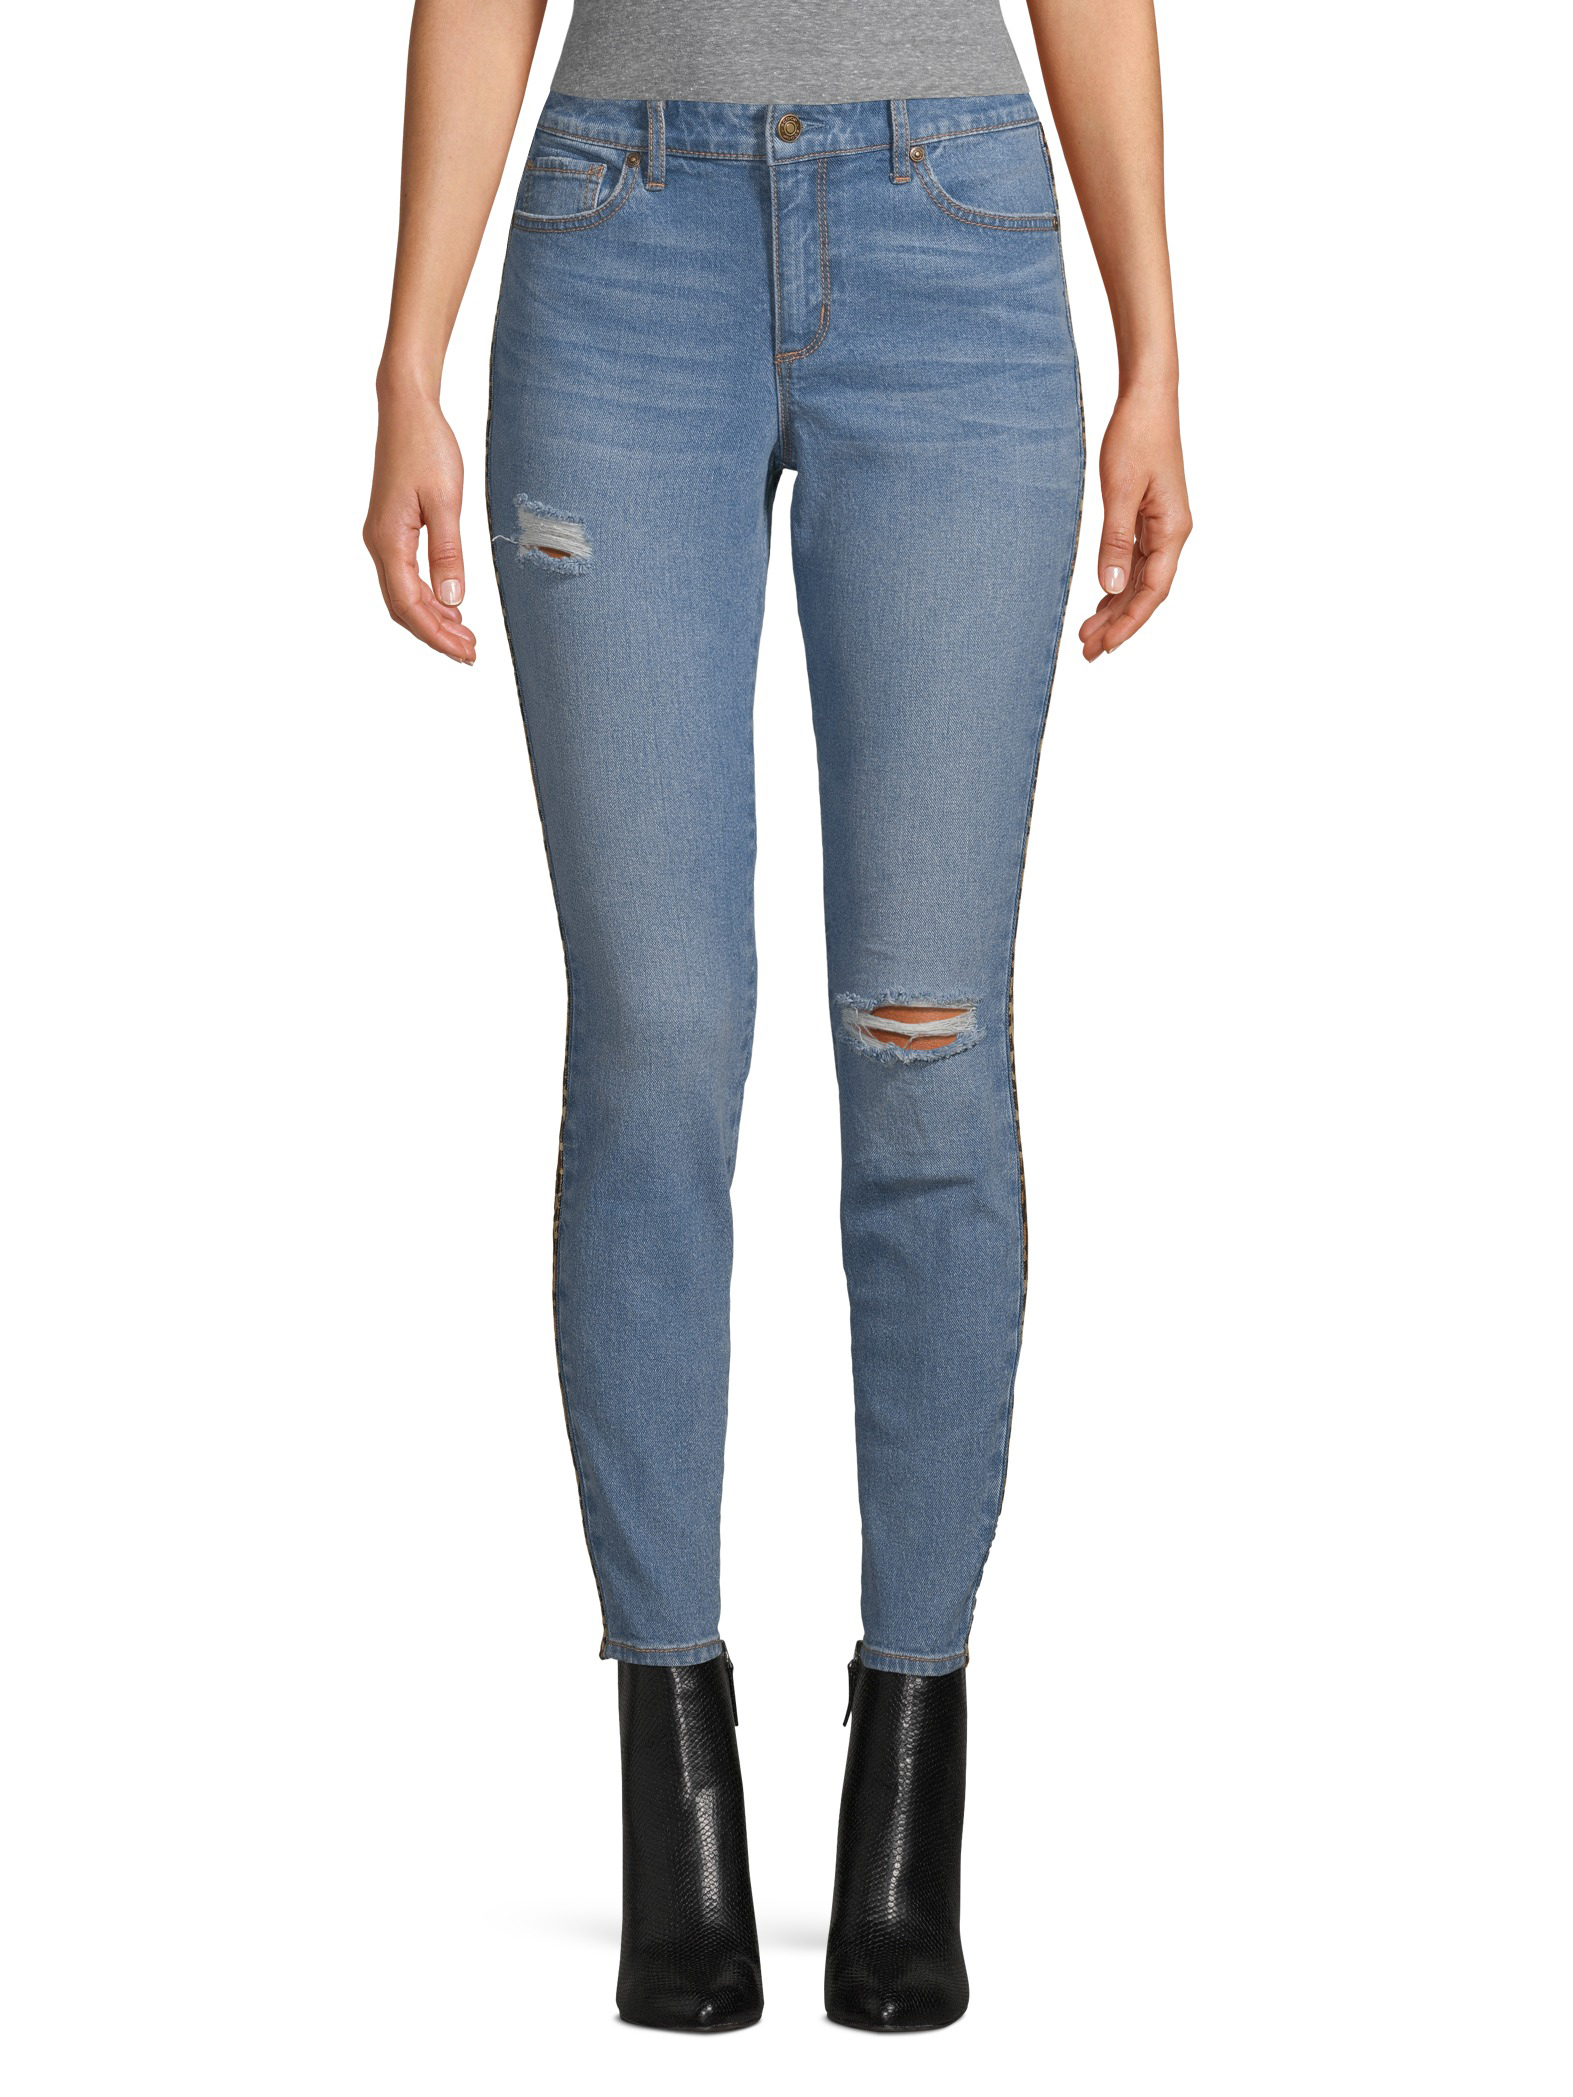 Scoop Women's Skinny Ankle Jeans with Leopard Stripe - image 1 of 7